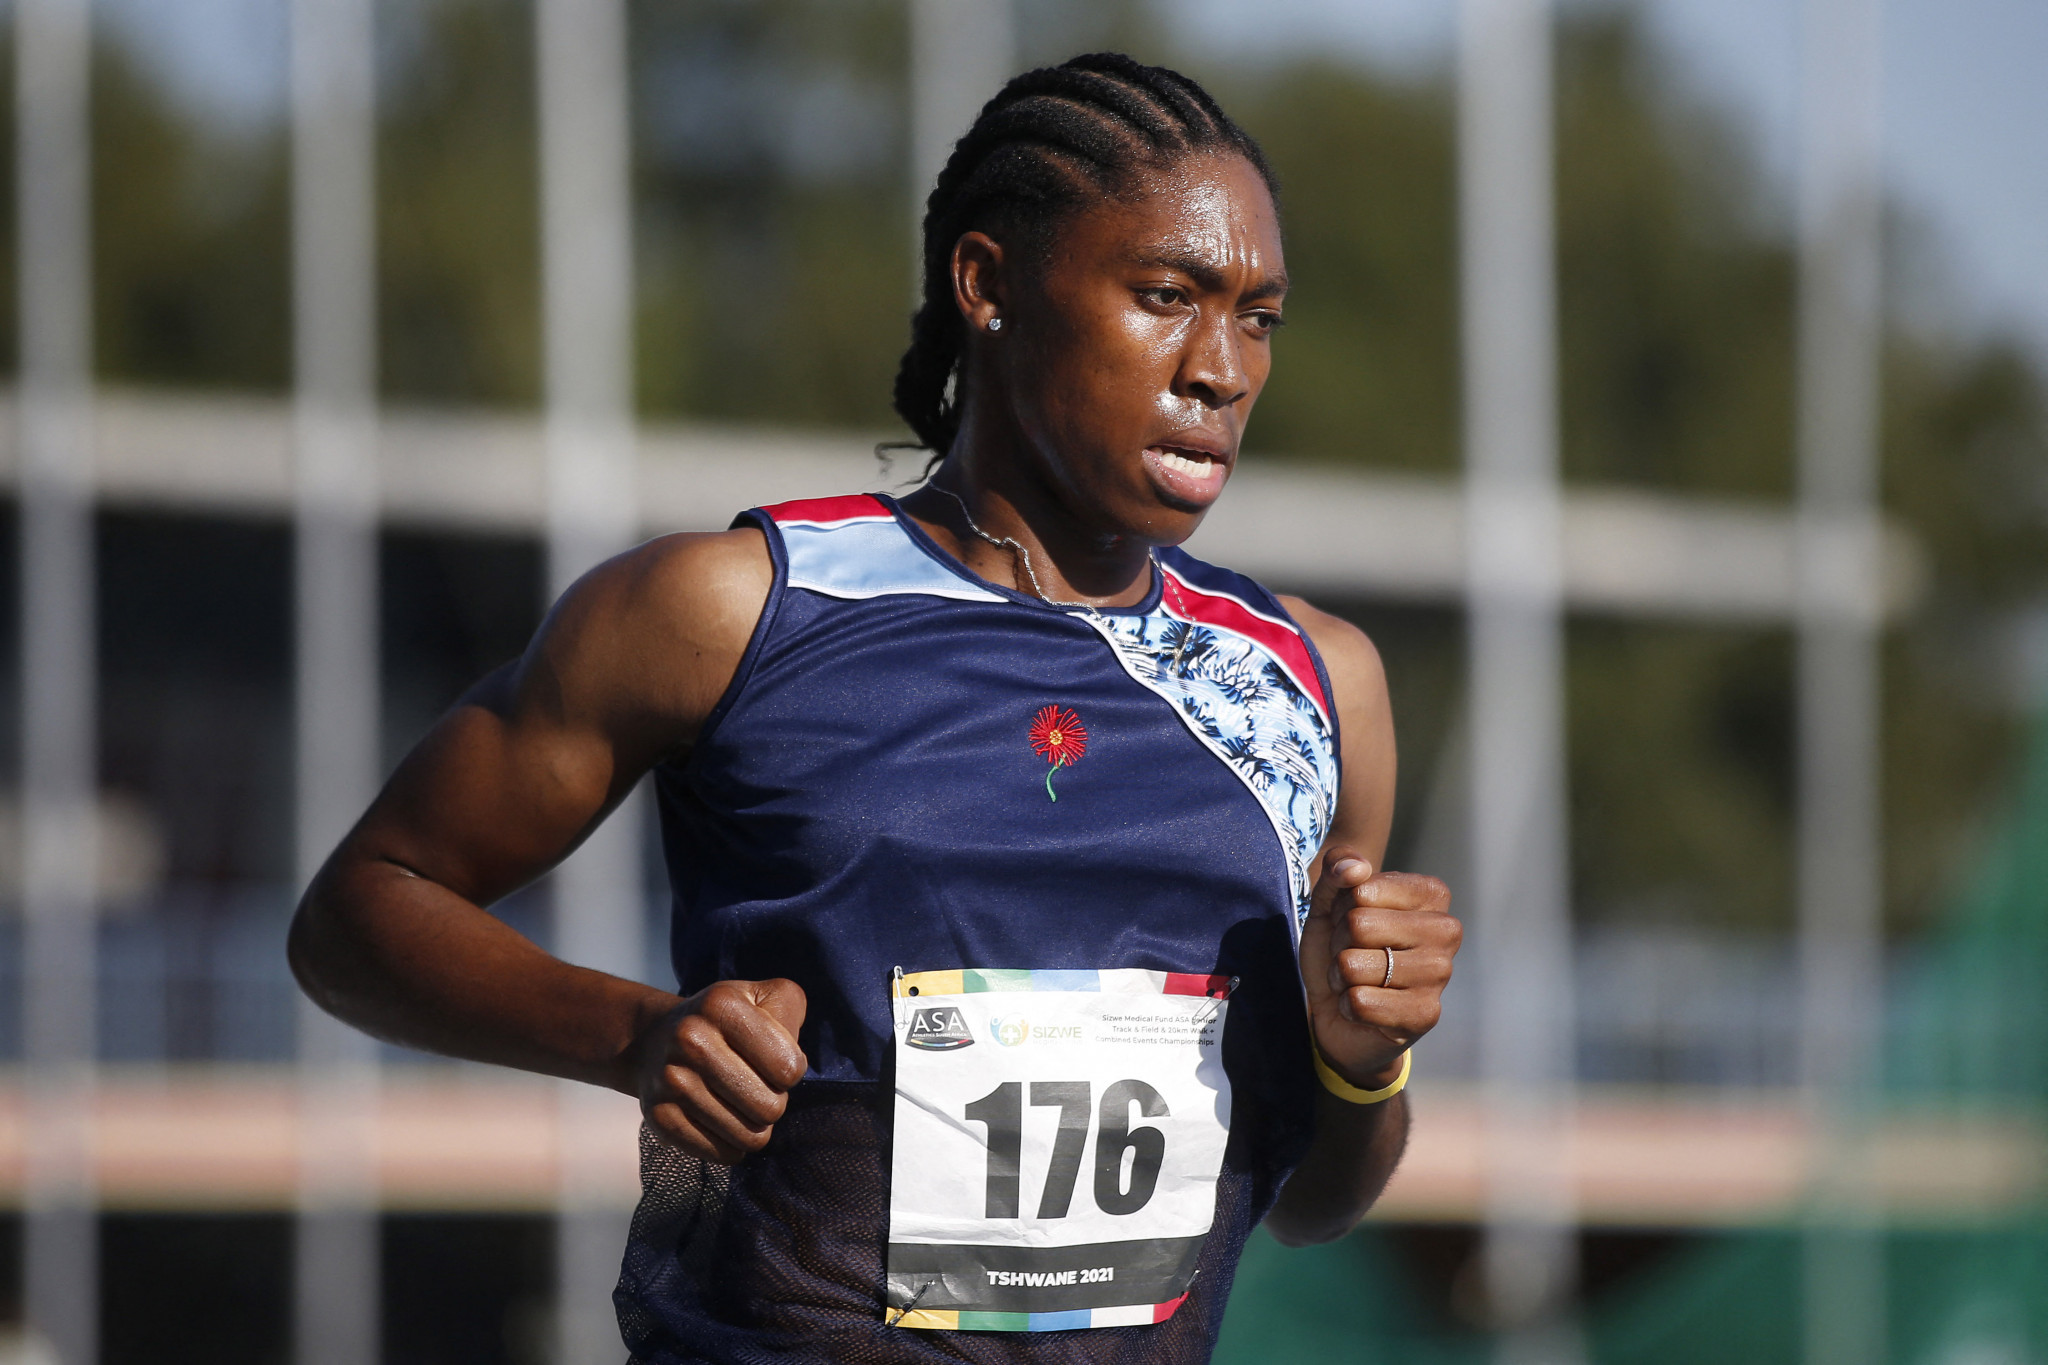 Caster Semenya is seeking to qualify for the 5,000m event at Tokyo 2020 ©Getty Images